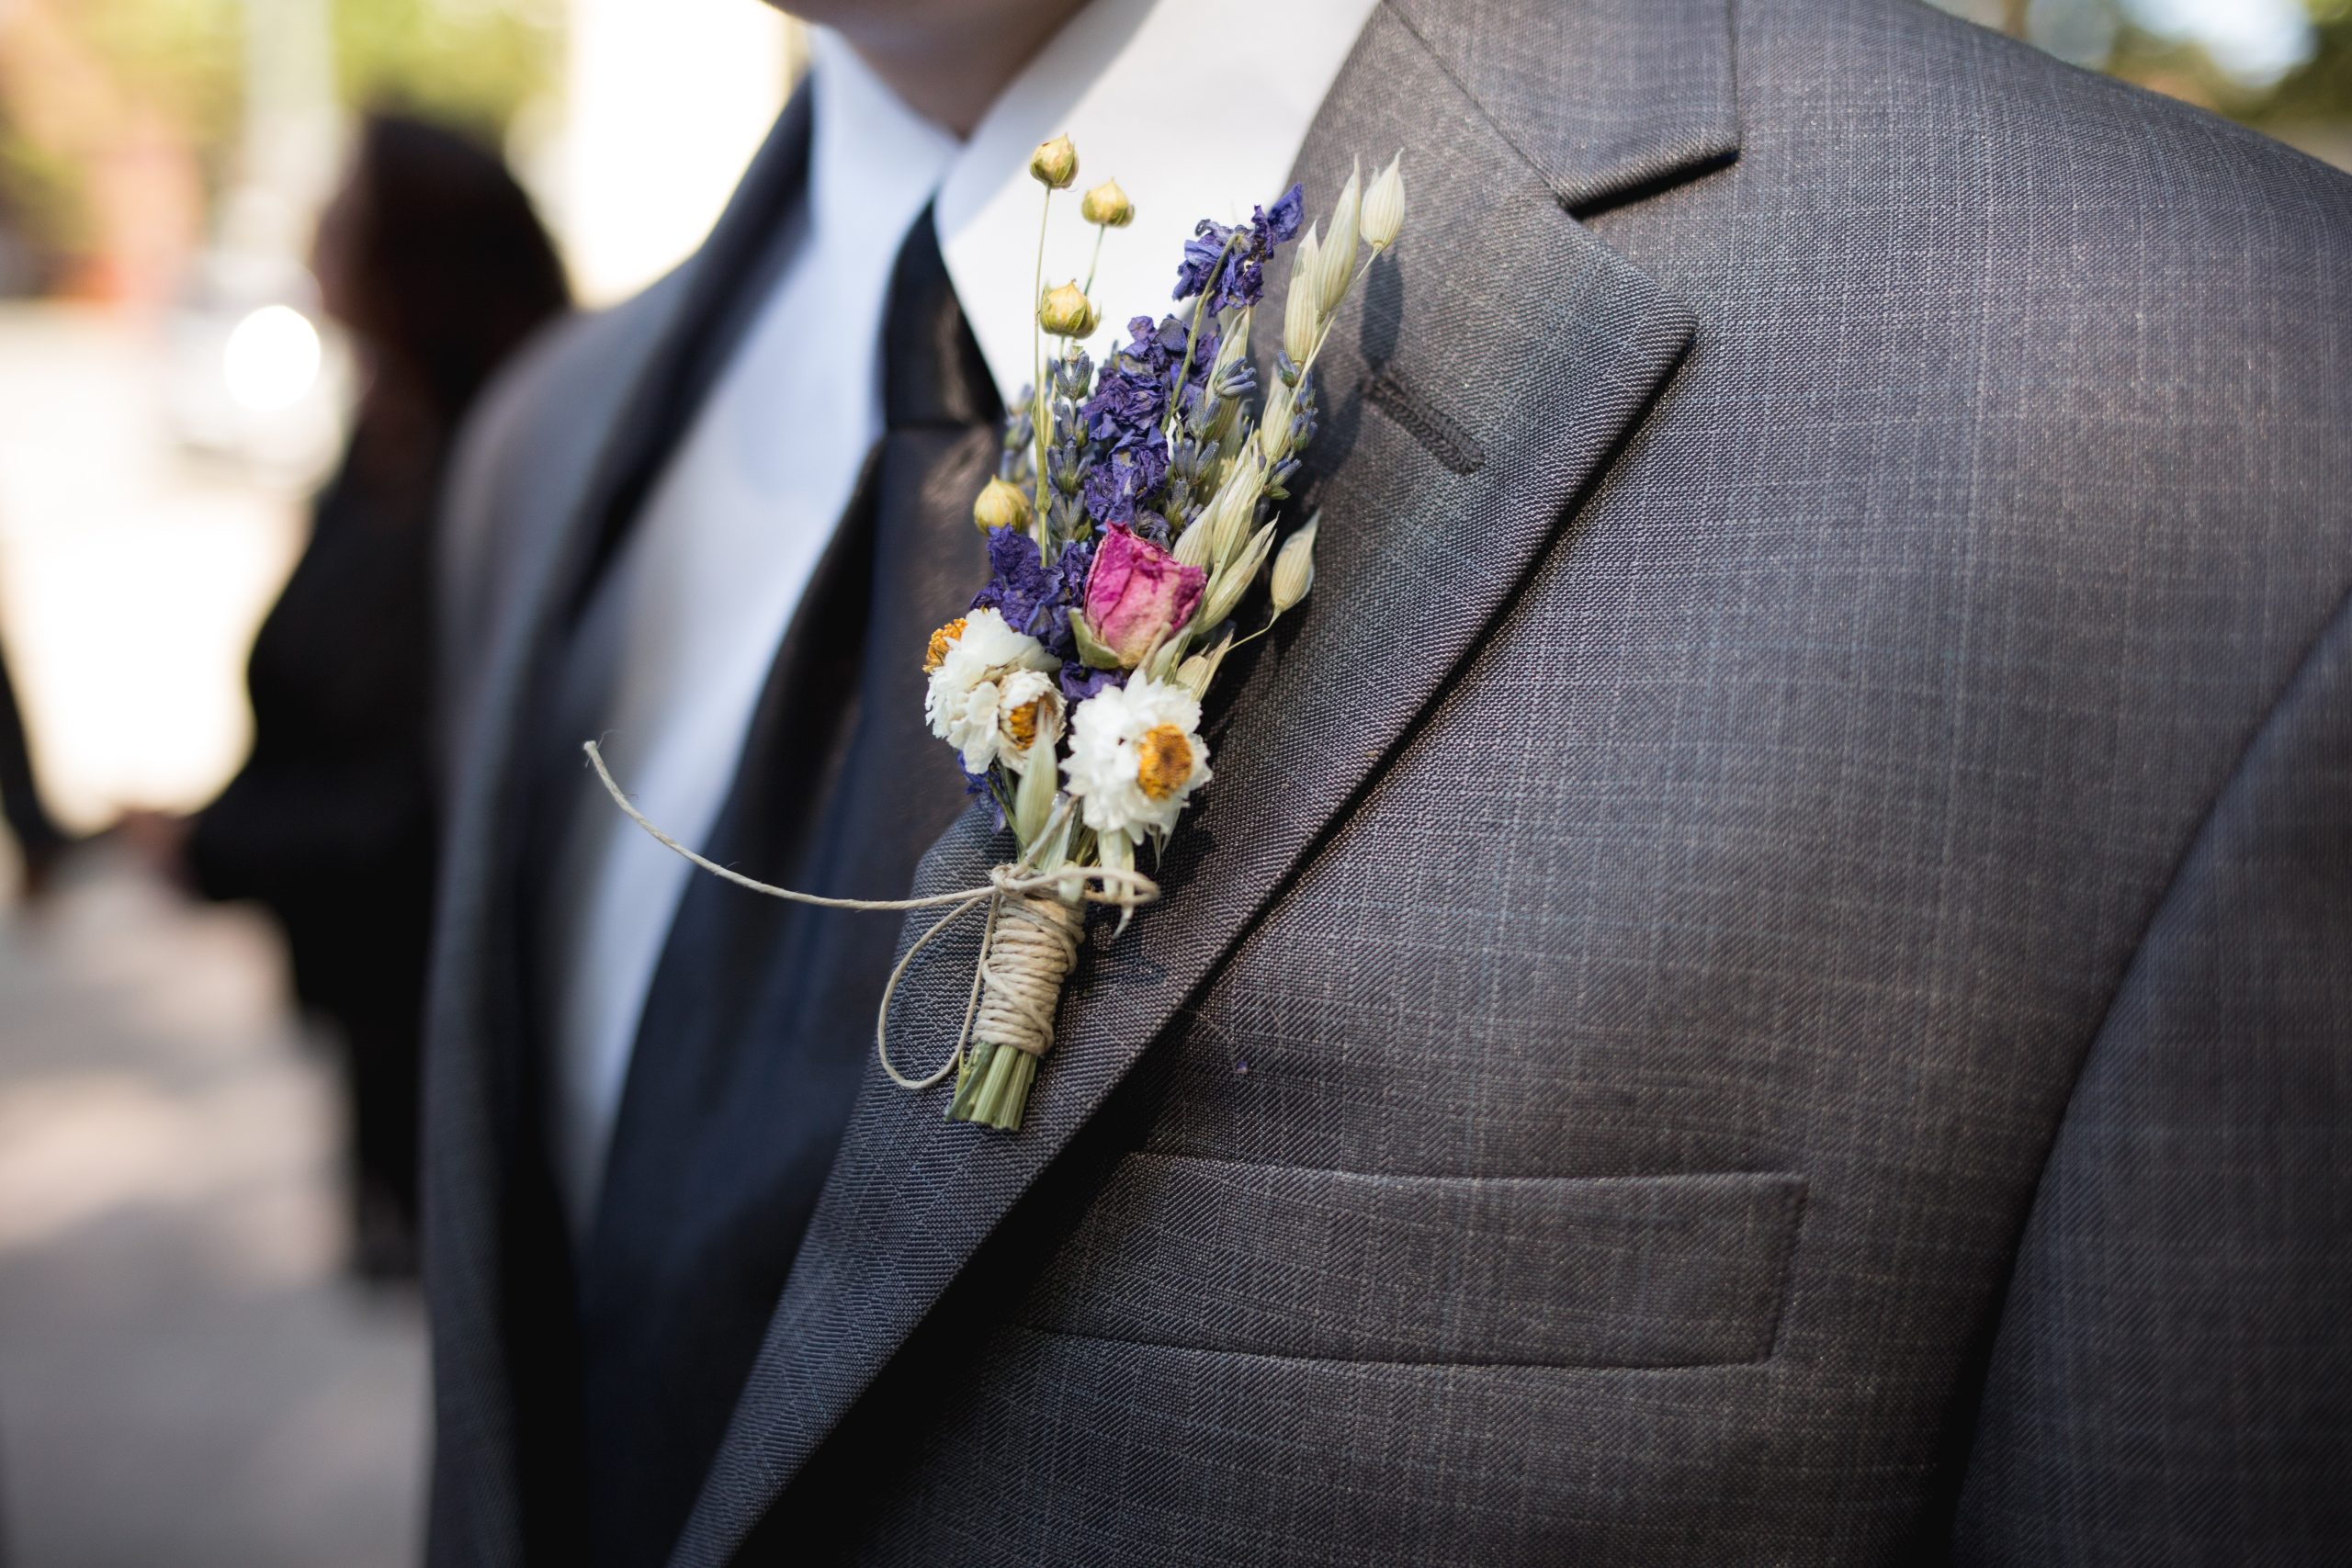 Groom’s Boutonniere on Gray Suit Jacket